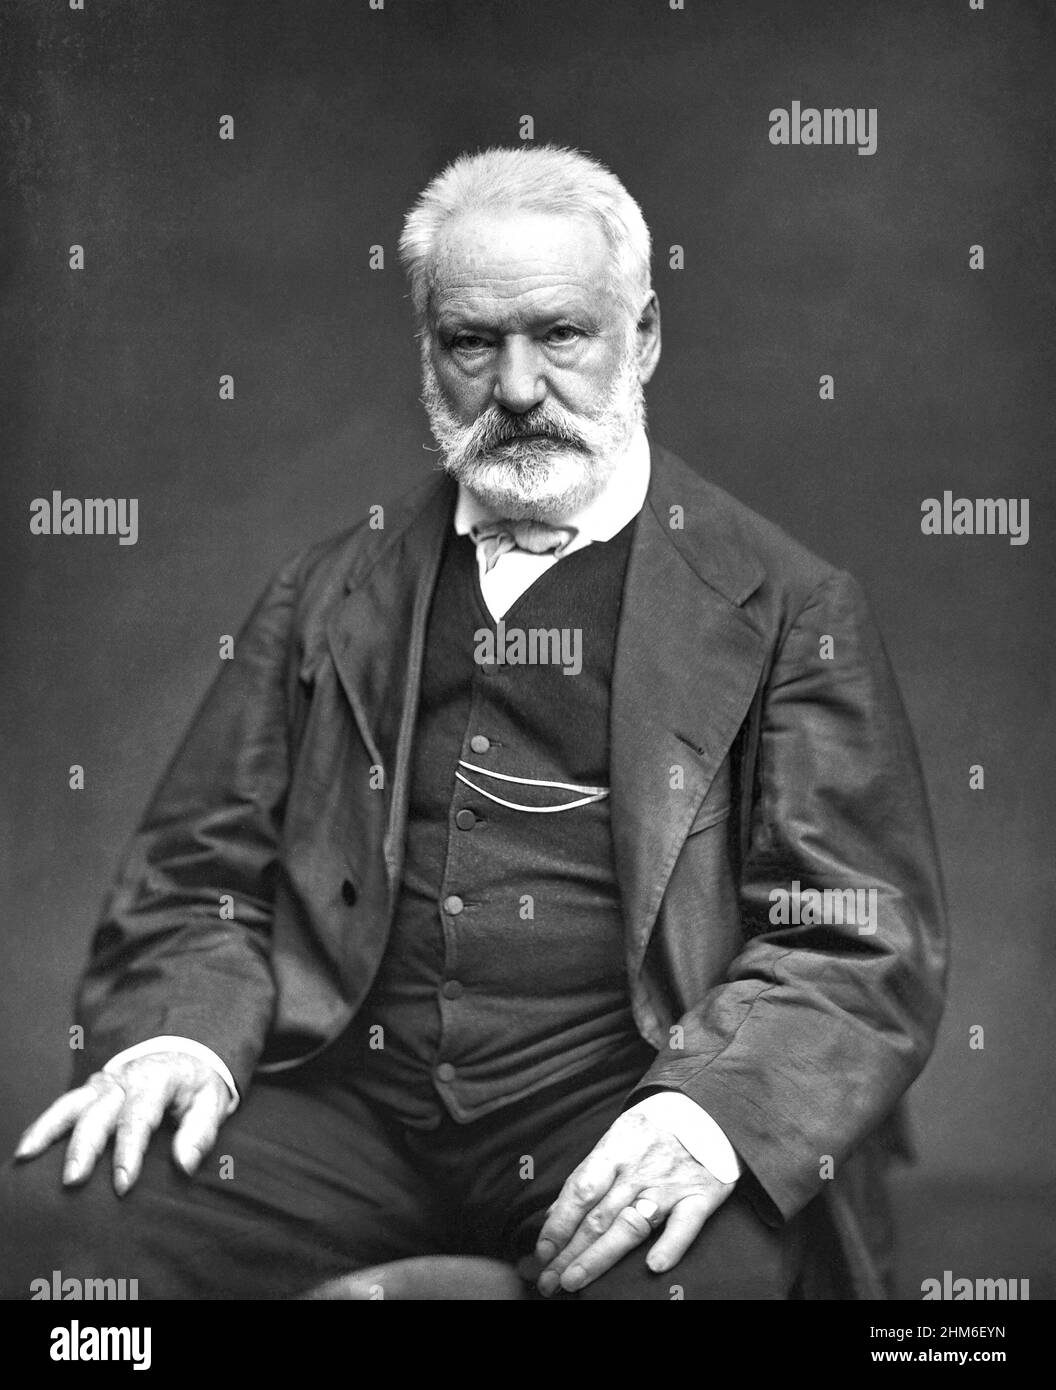 A portrait of the French writer Victor Hugo, author of Les Misèrables, from 1876 when he was 74 yrs old Stock Photo